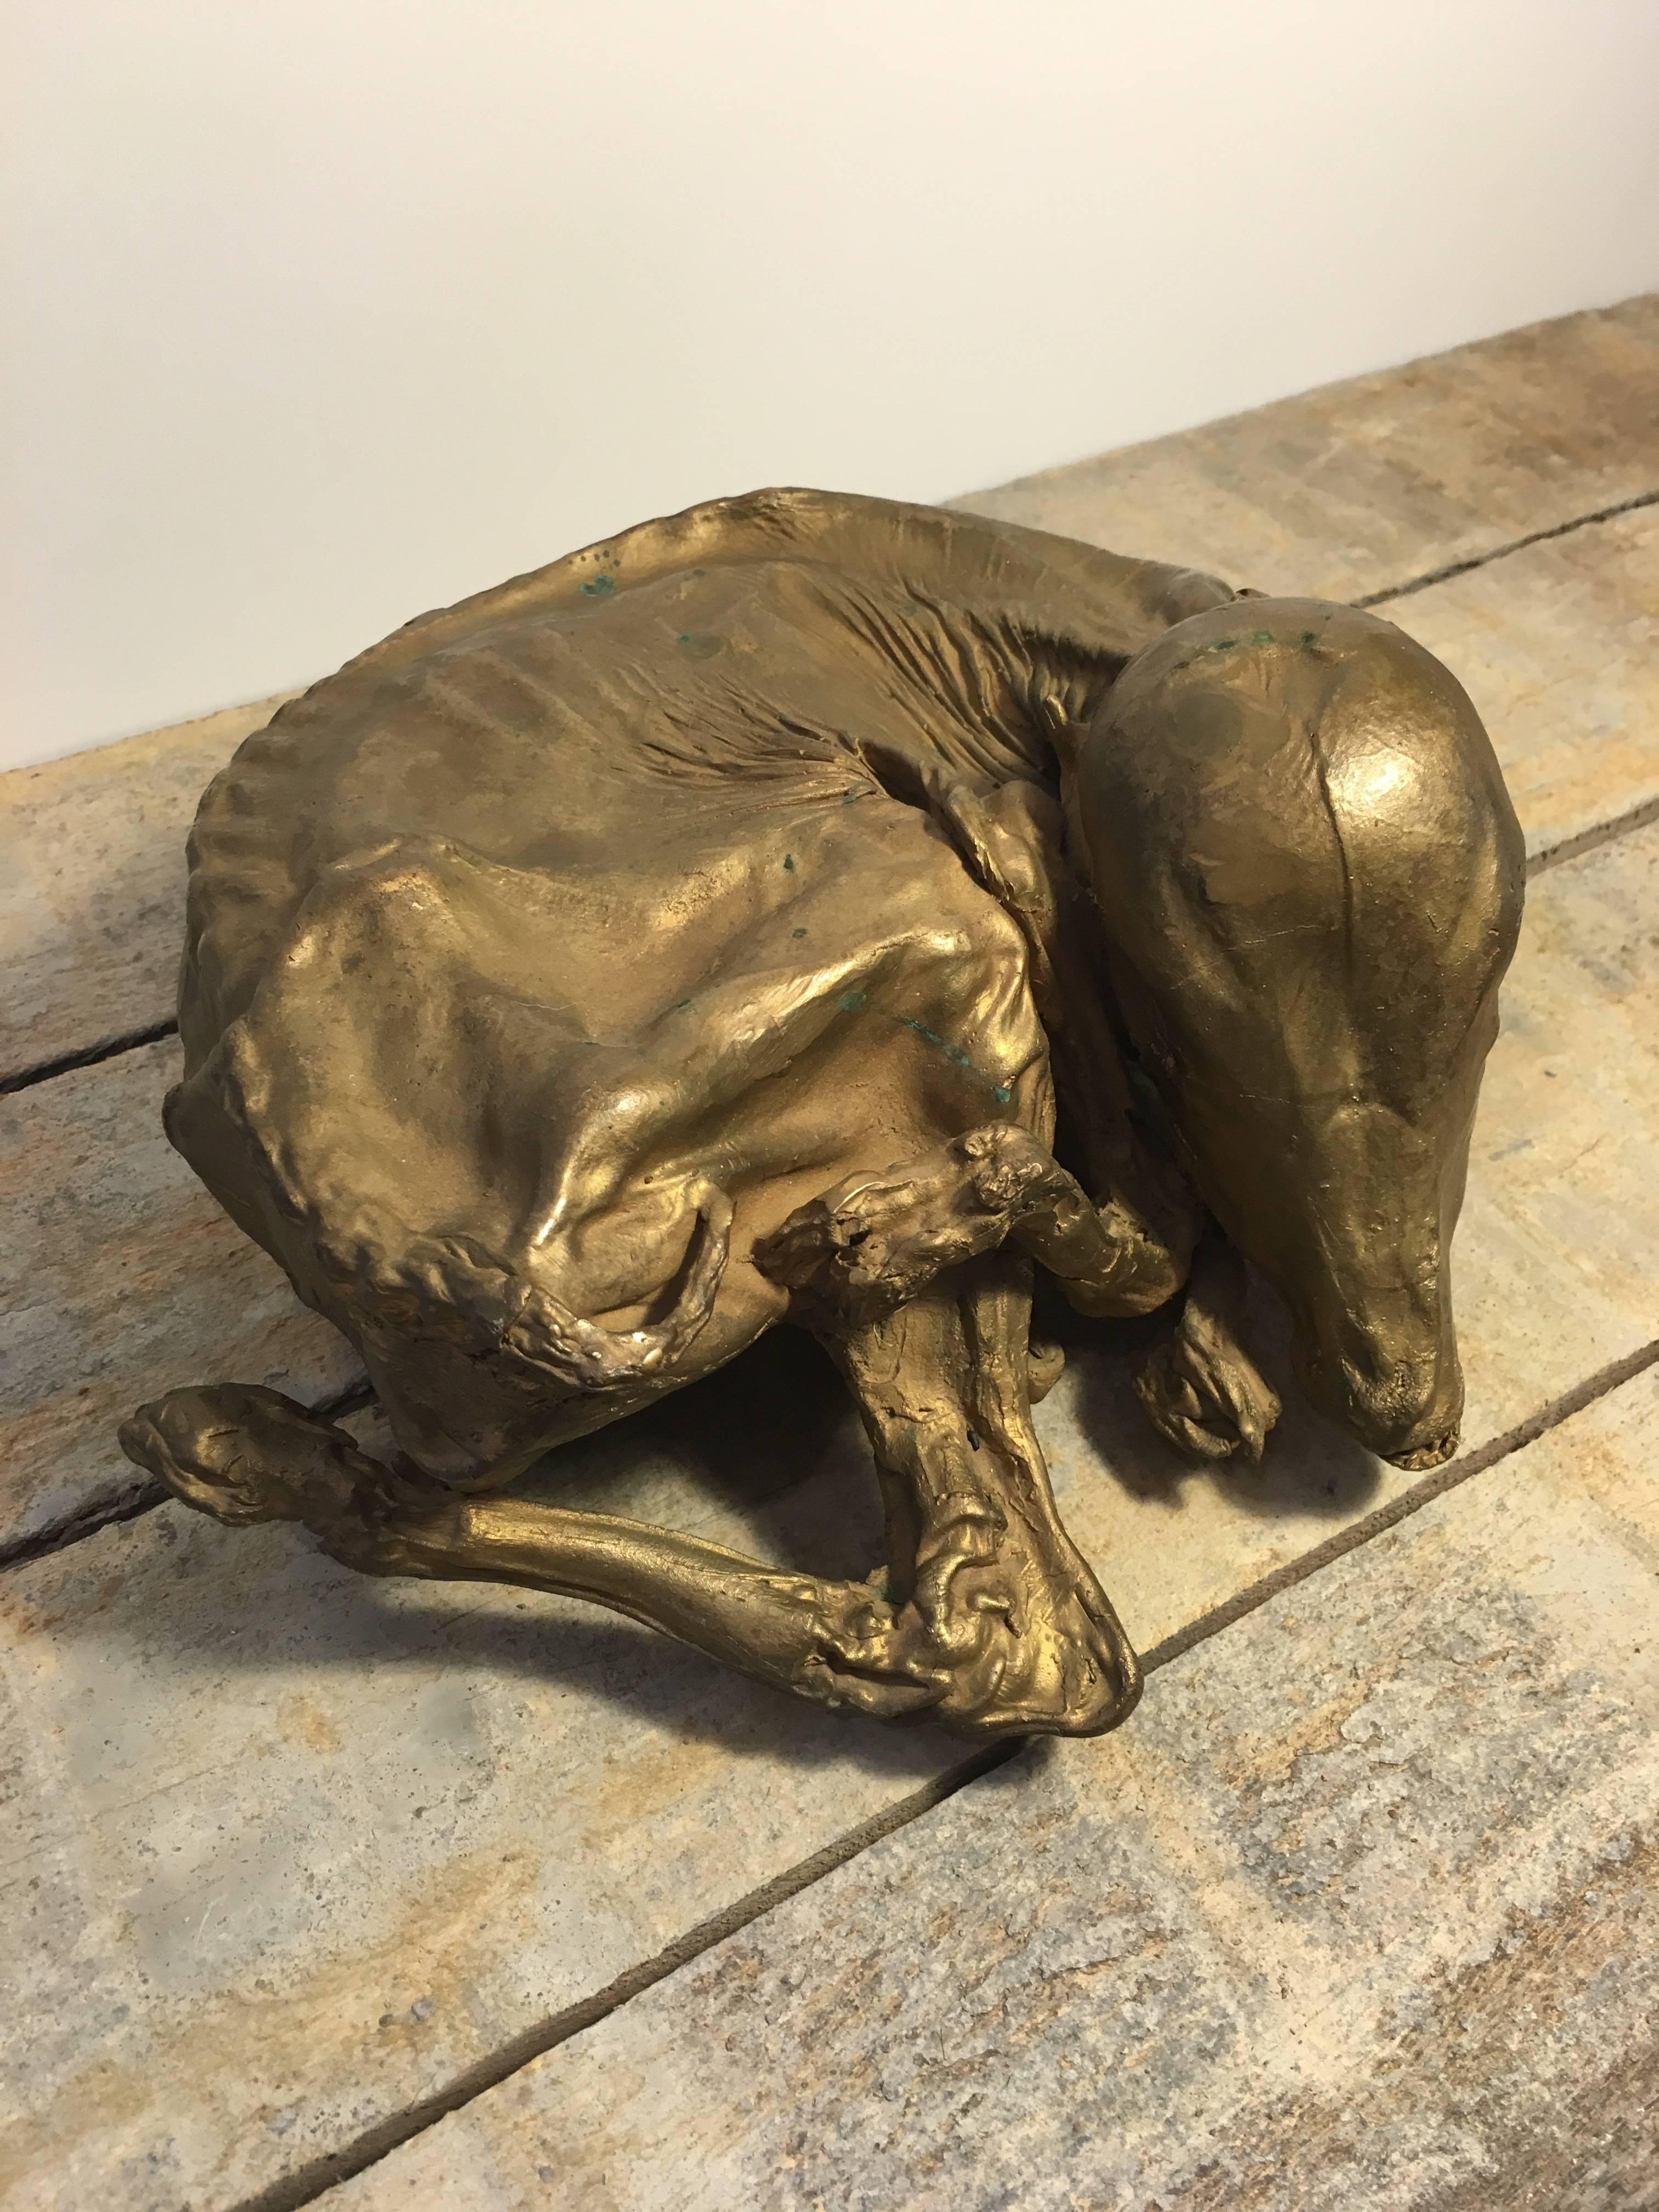 Vintage bronze cast of a calf fetus from Holland. Bronze cast is from the 1980's and has impeccable detail. Vintage condition with minor wear consistent to age and use.

